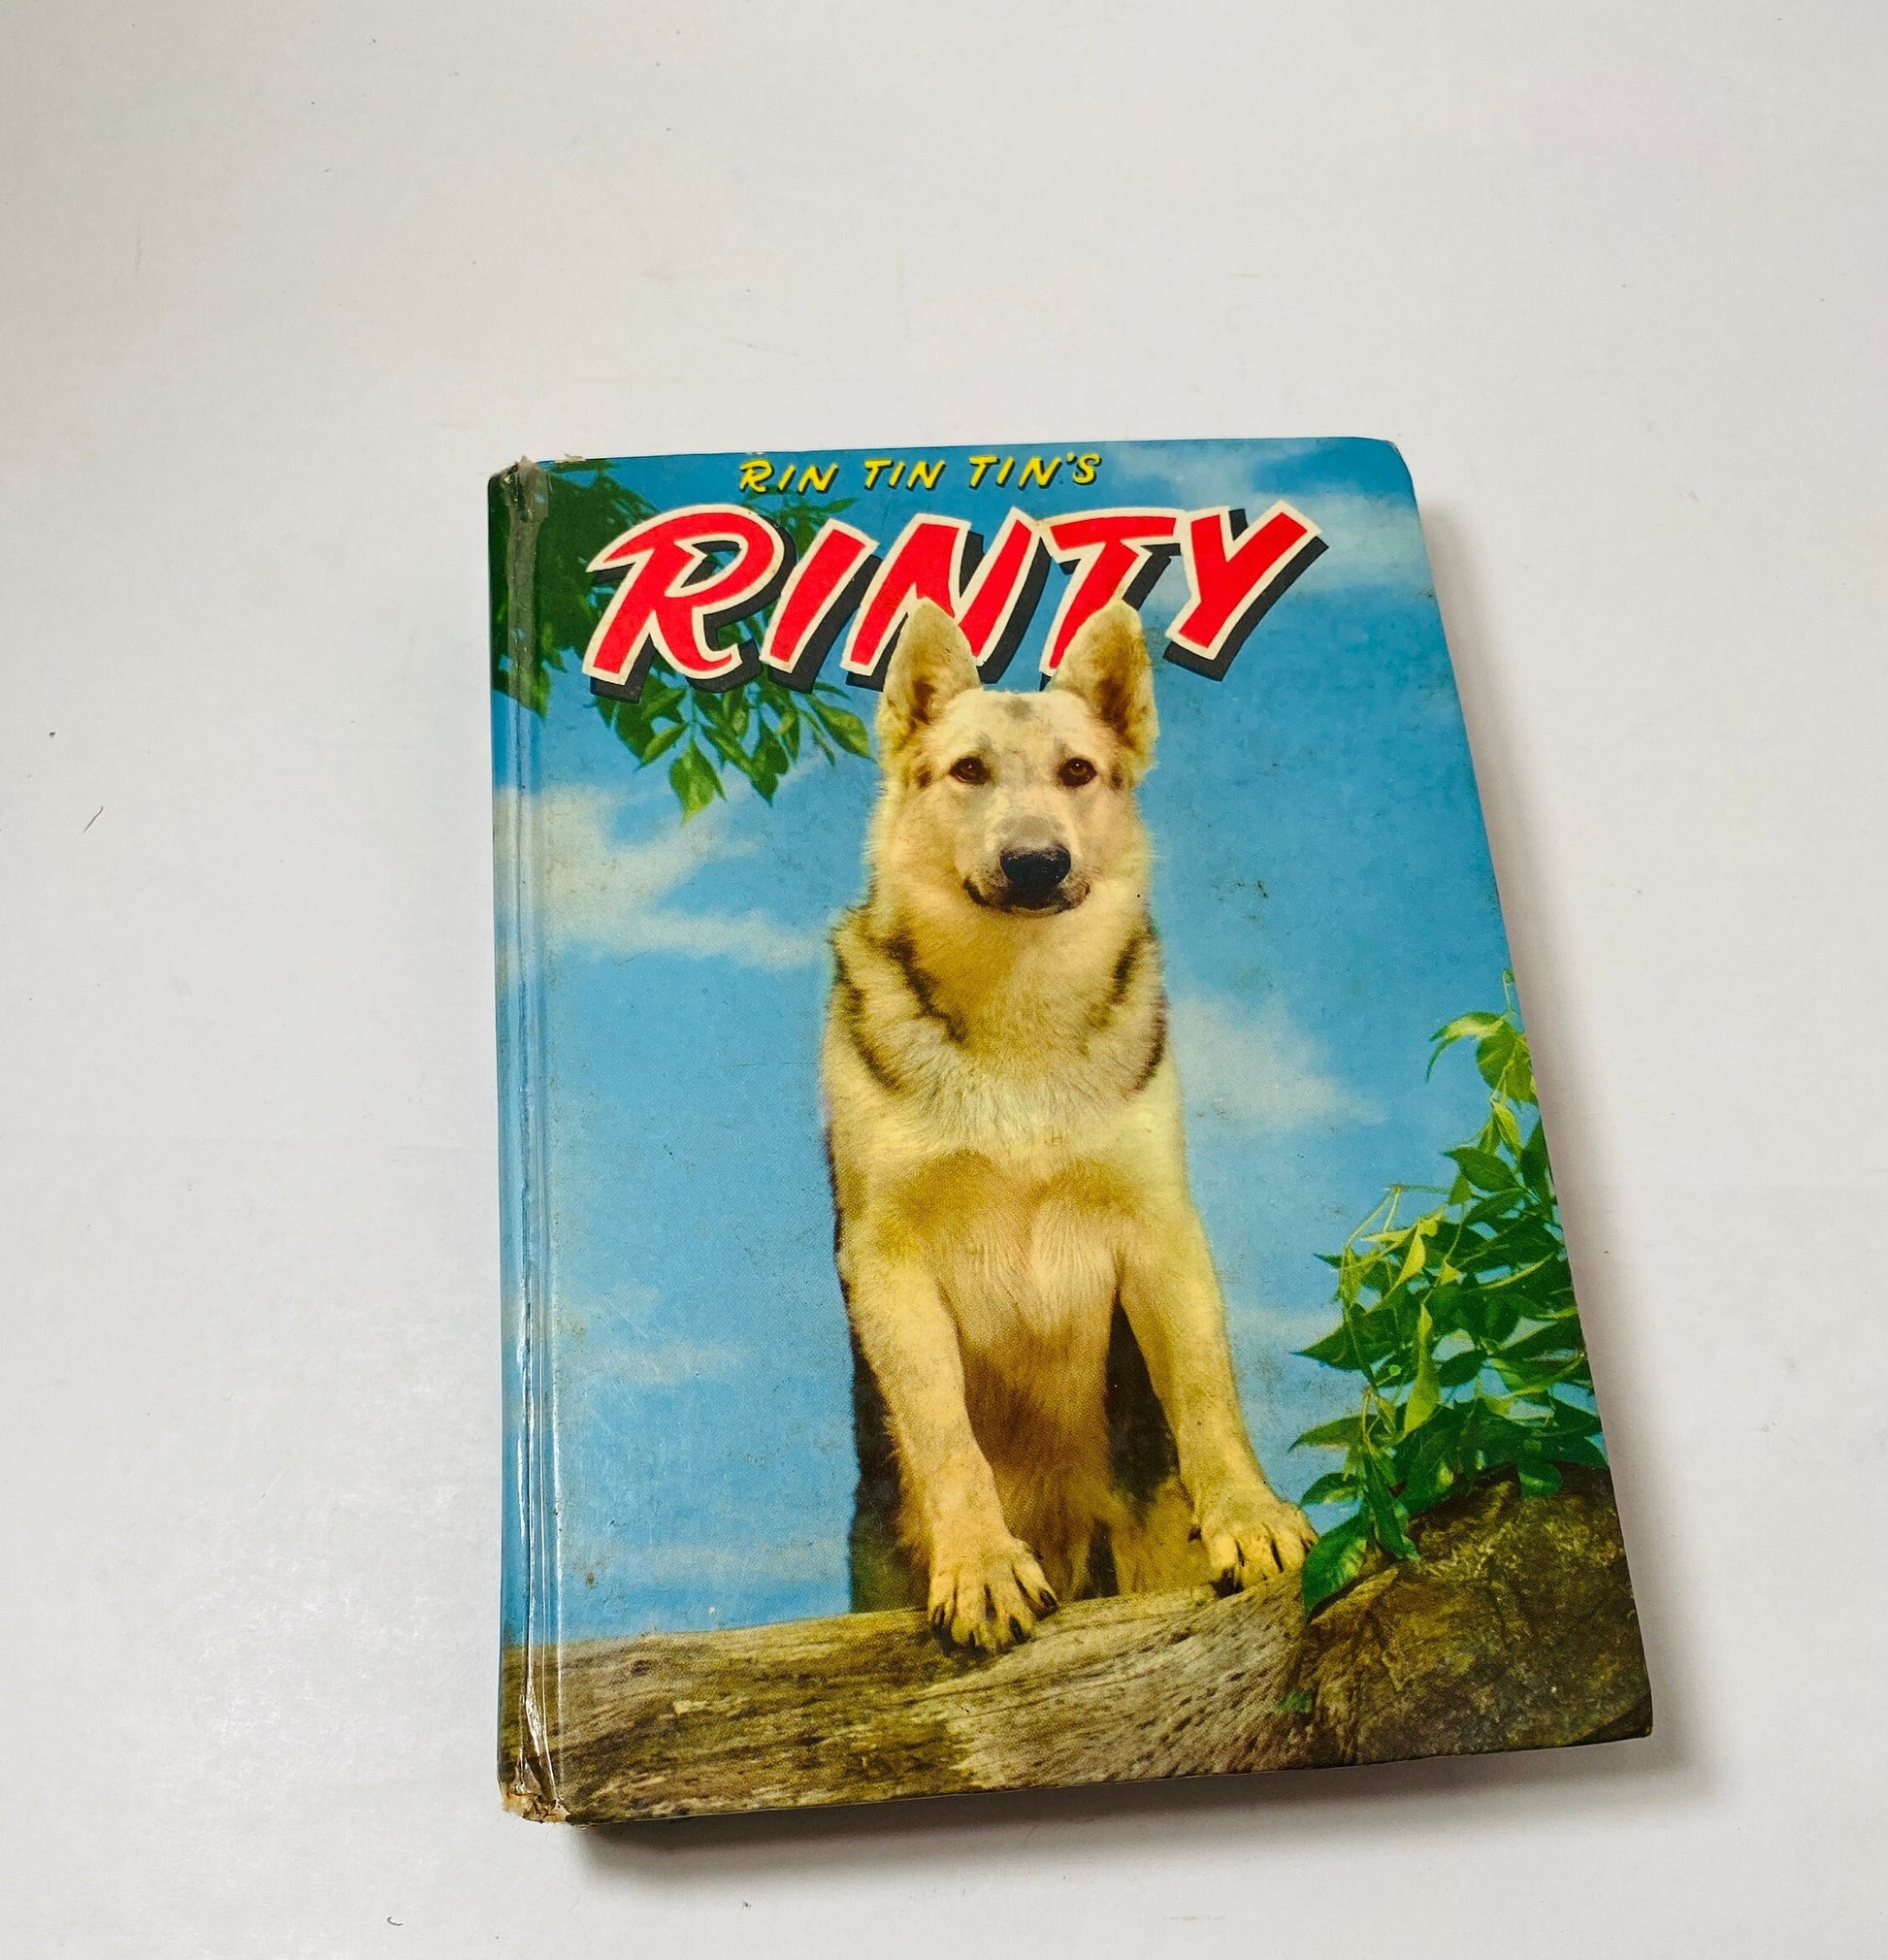 Rinty television vintage Rin Tin Tin book based on famous German Shepherd movie dog by Julie Campbell circa 1954 Cello Cameo Edition